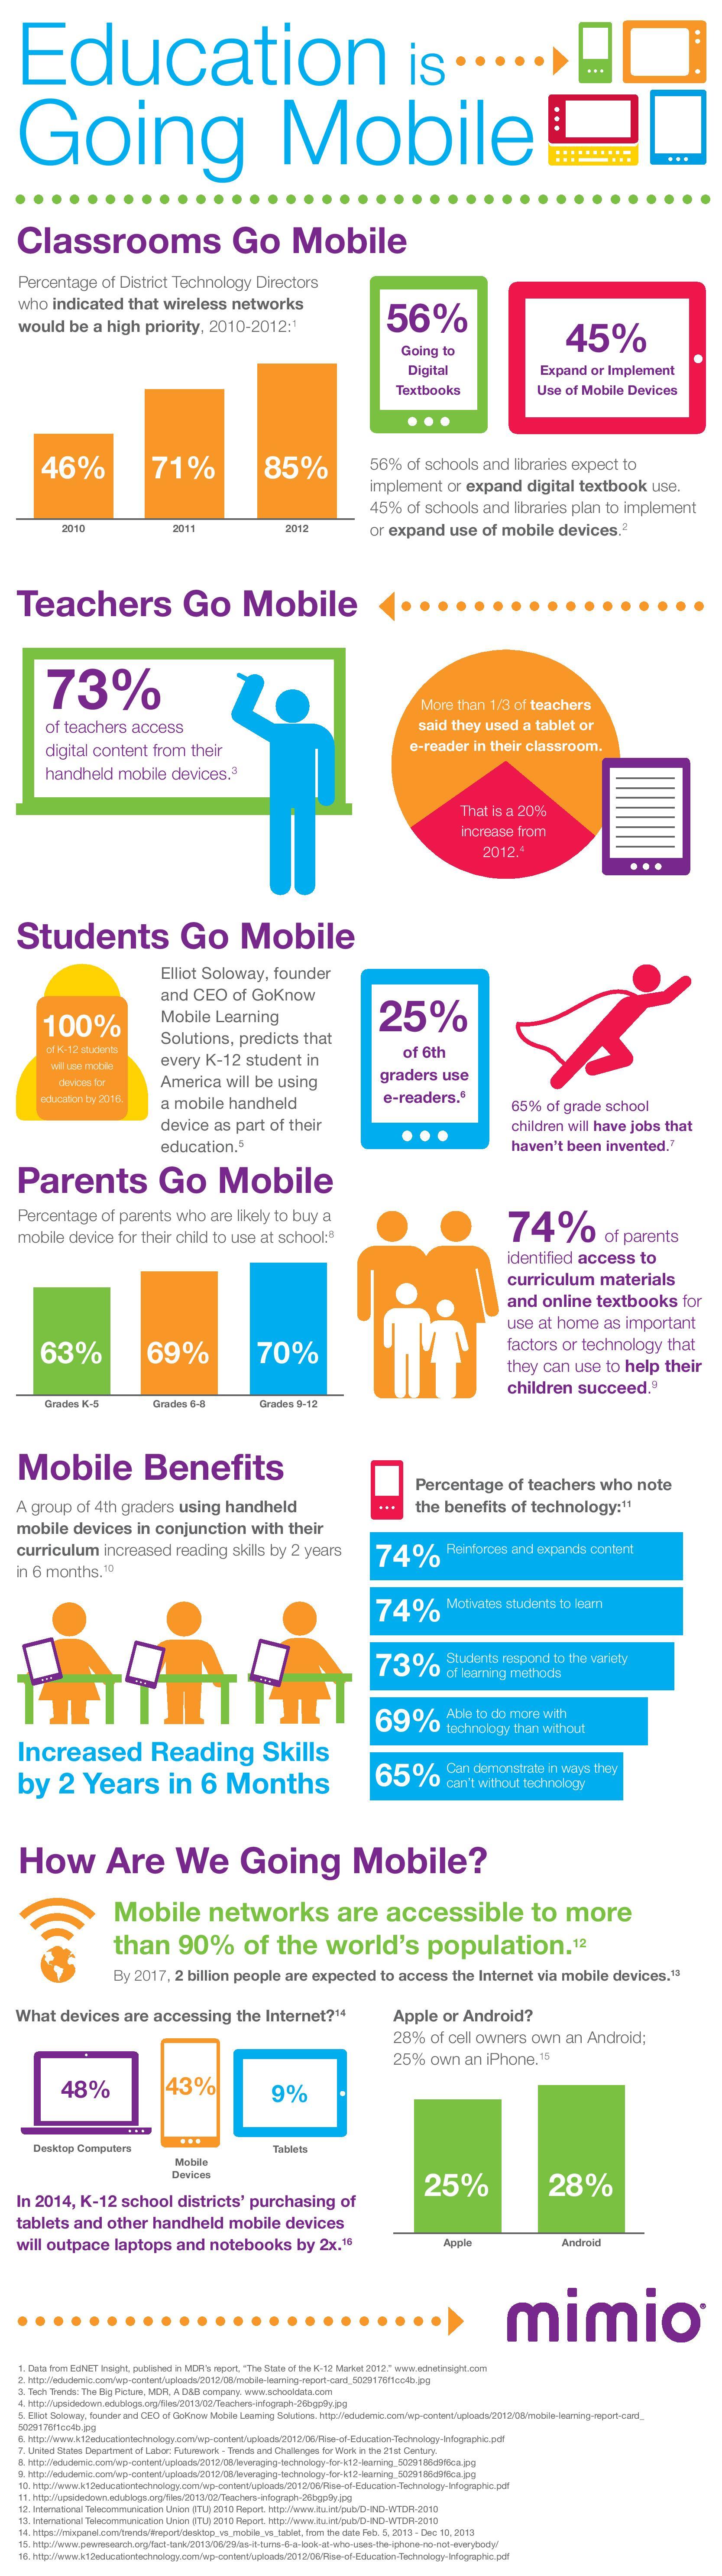 Education is Going Mobile Infographic